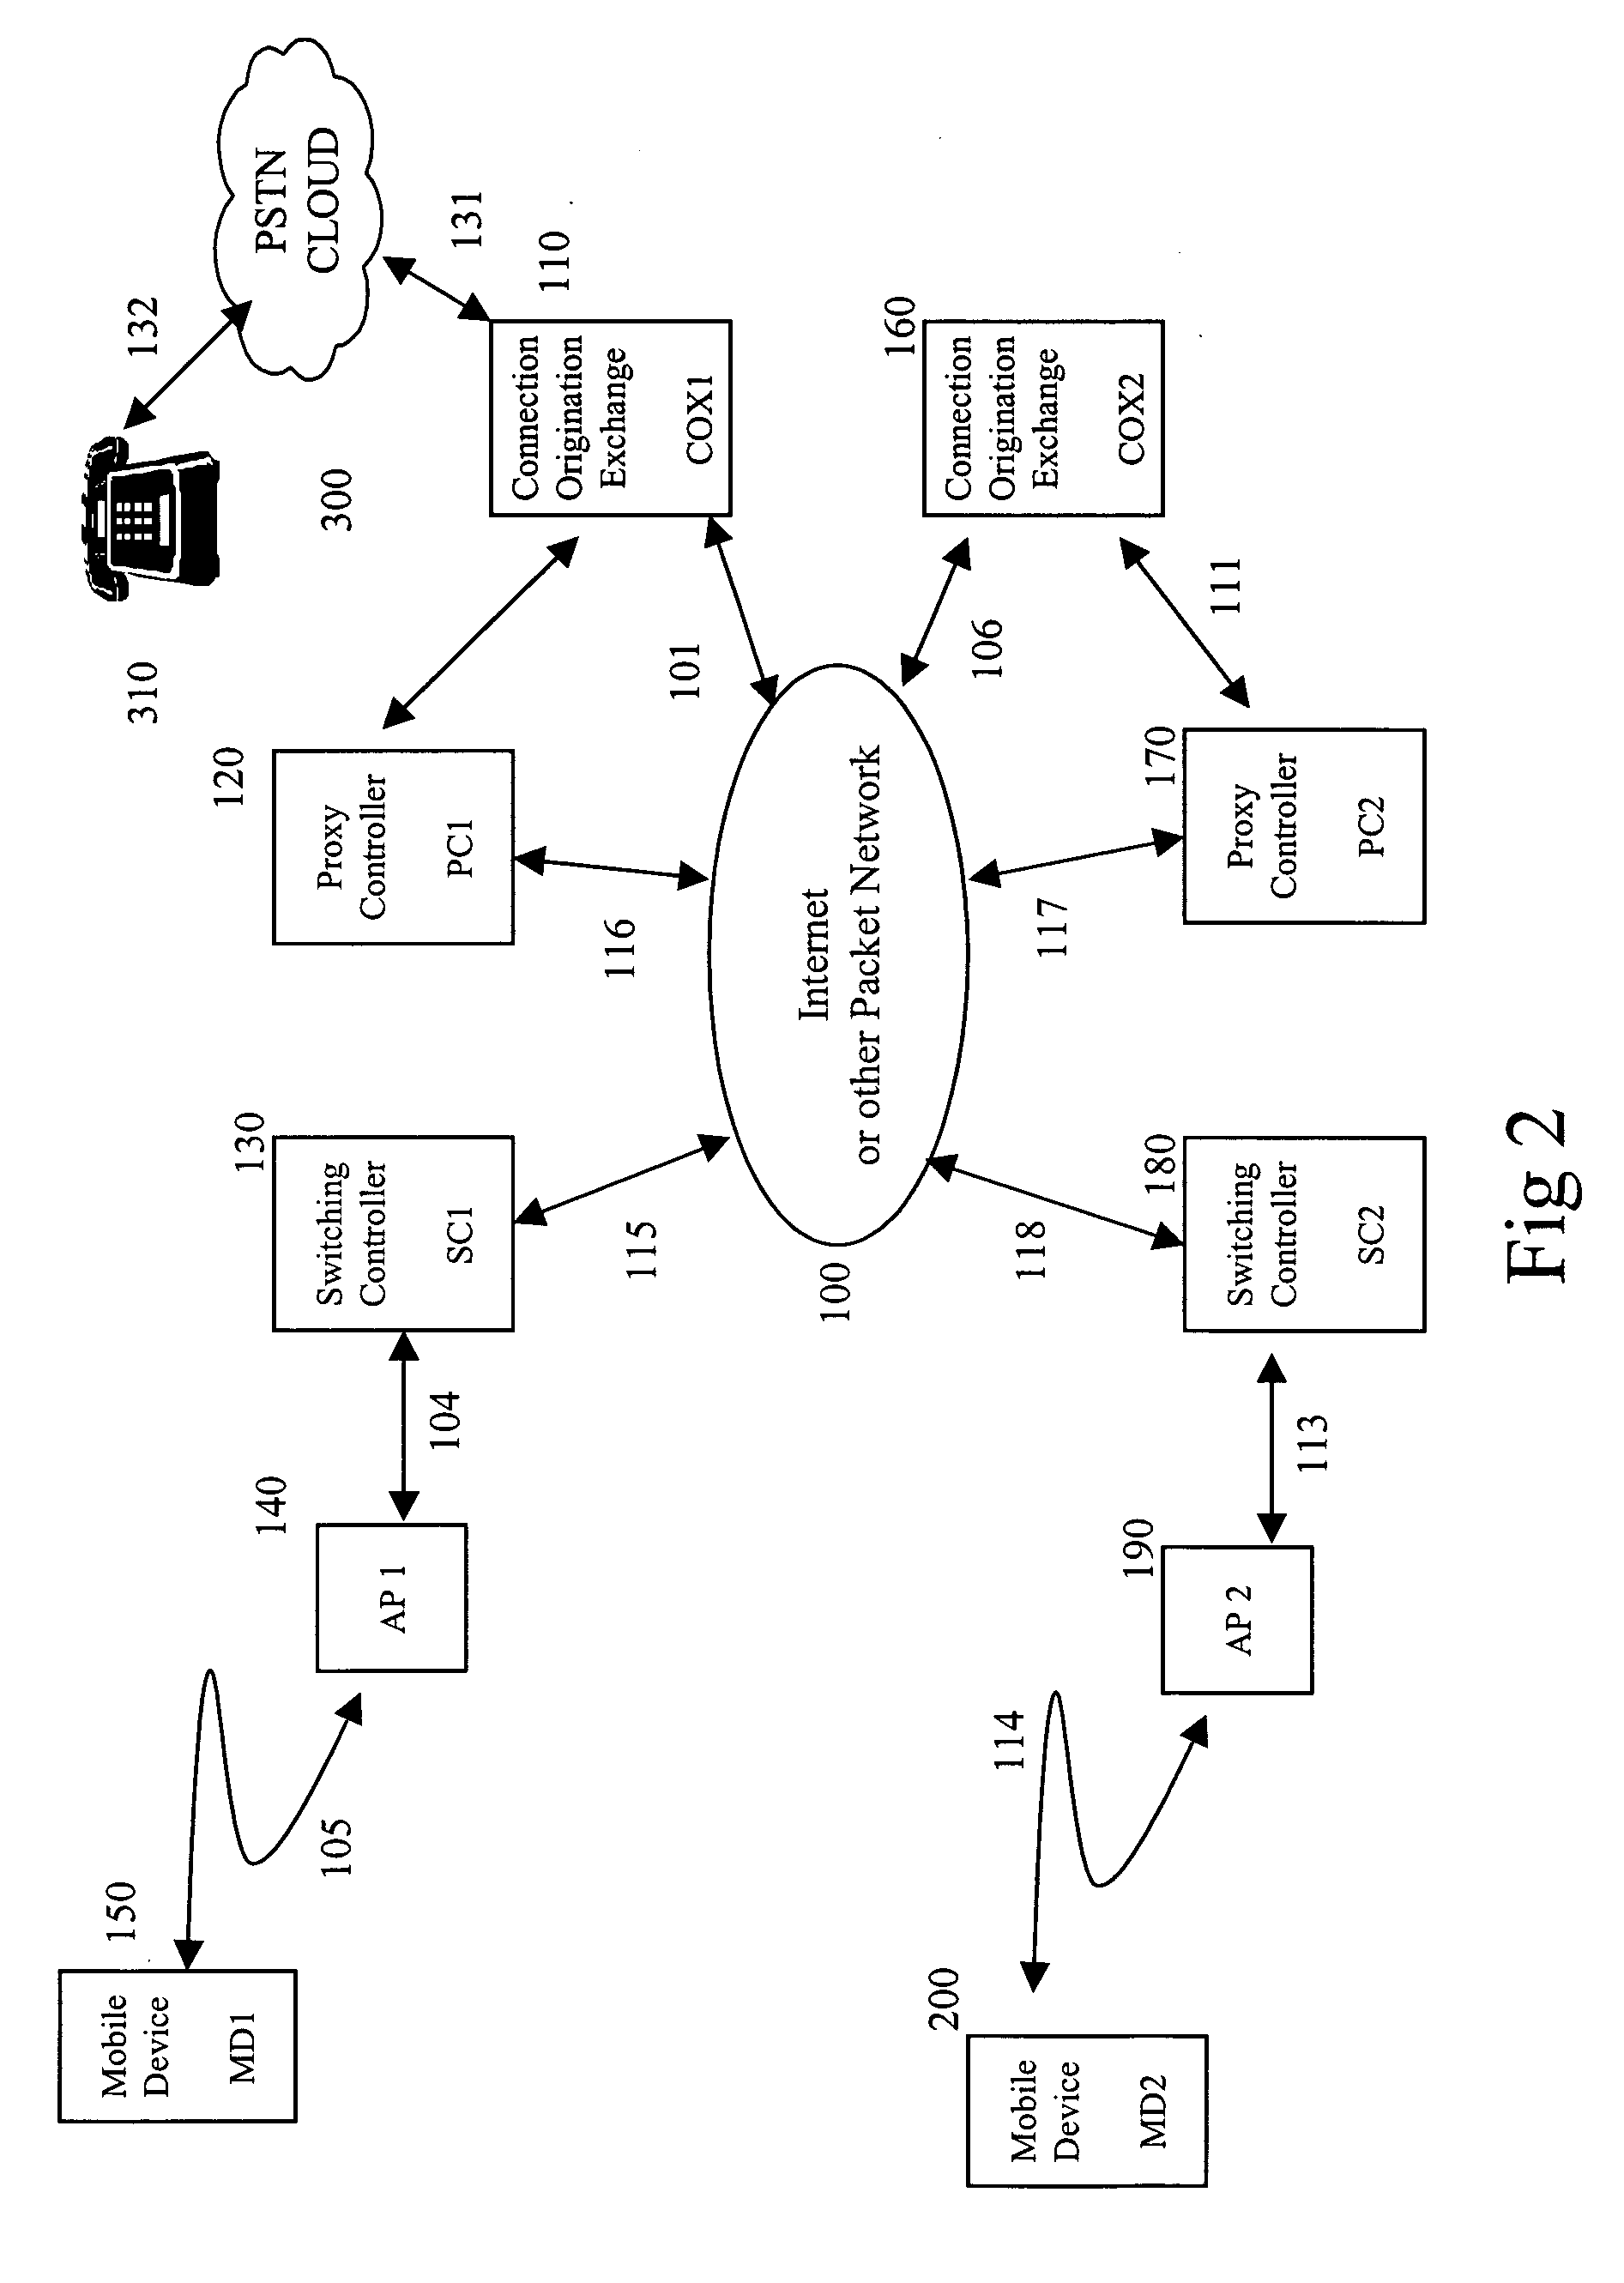 Distributed disparate wireless switching network